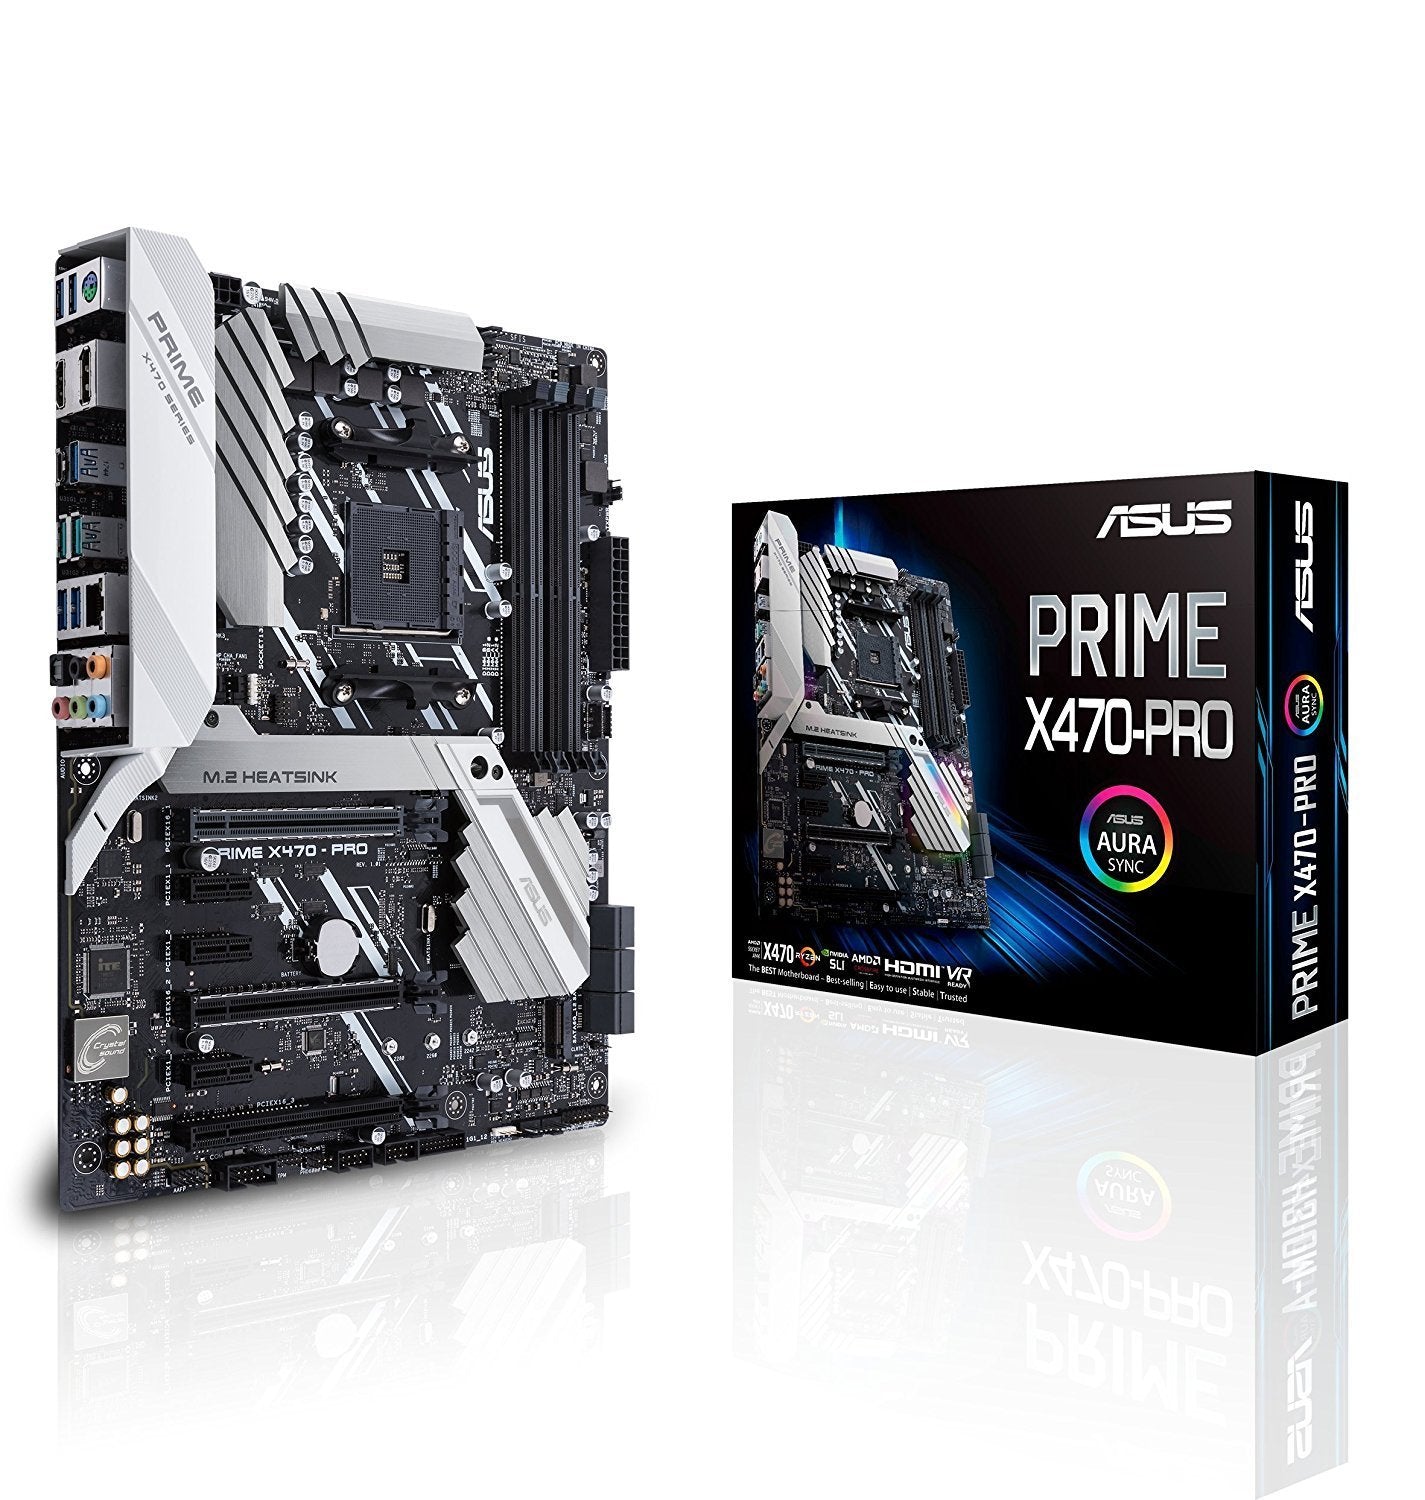 Asus Prime X470-Pro - AMD ATX Motherboard - Store 974 | ستور ٩٧٤